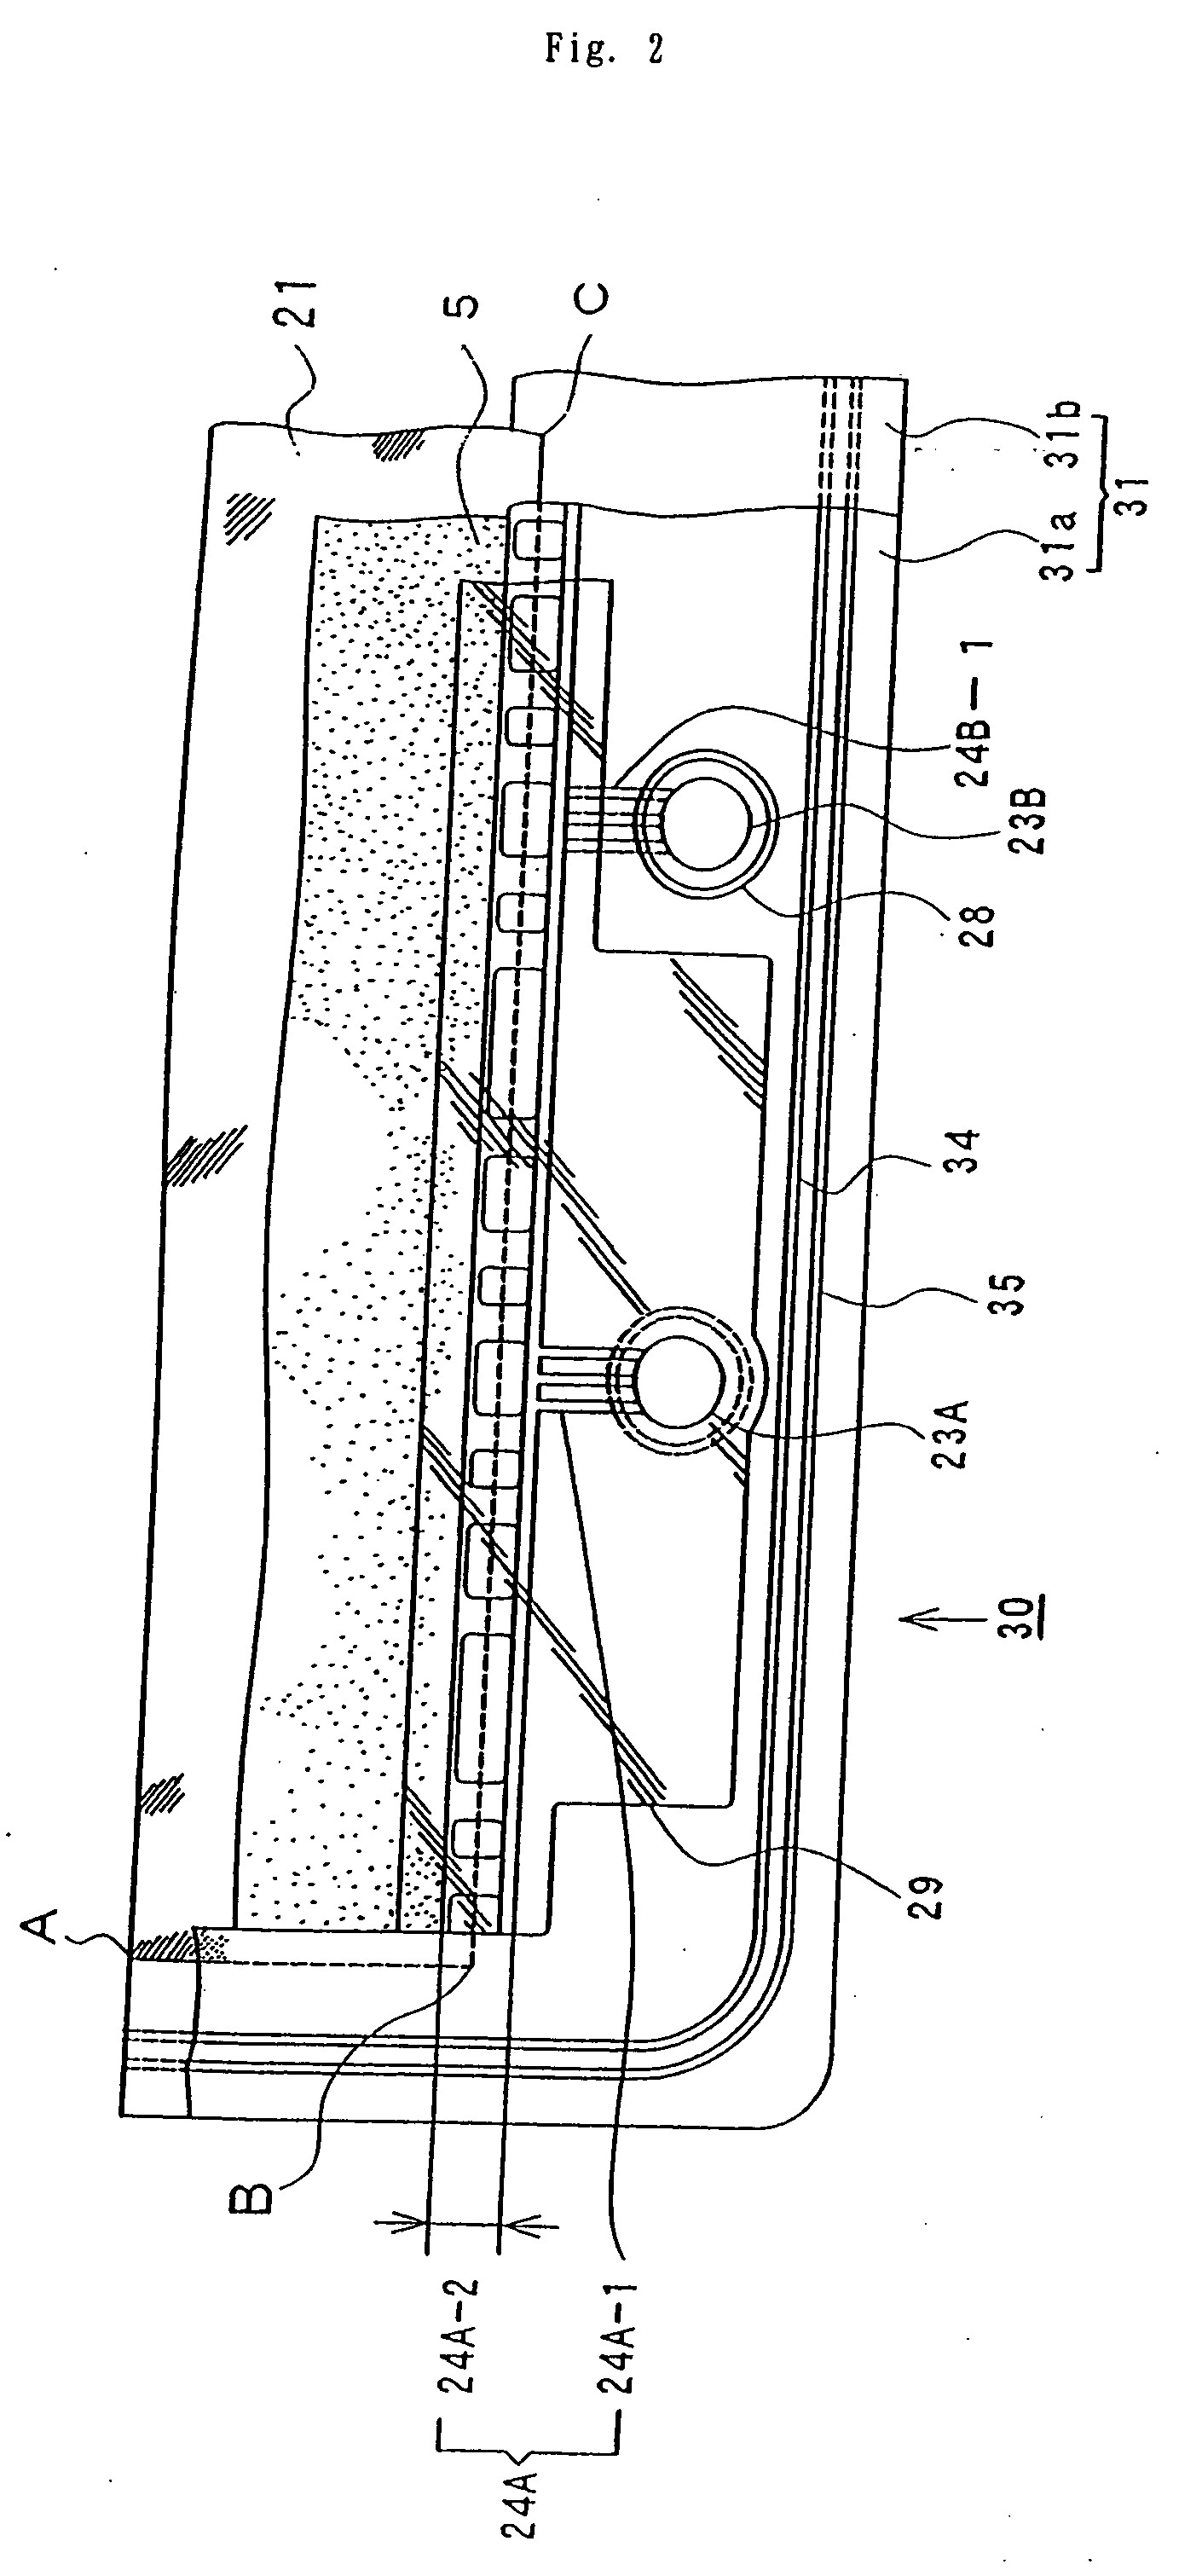 Cell frame for redox flow battery, and redox flow battery